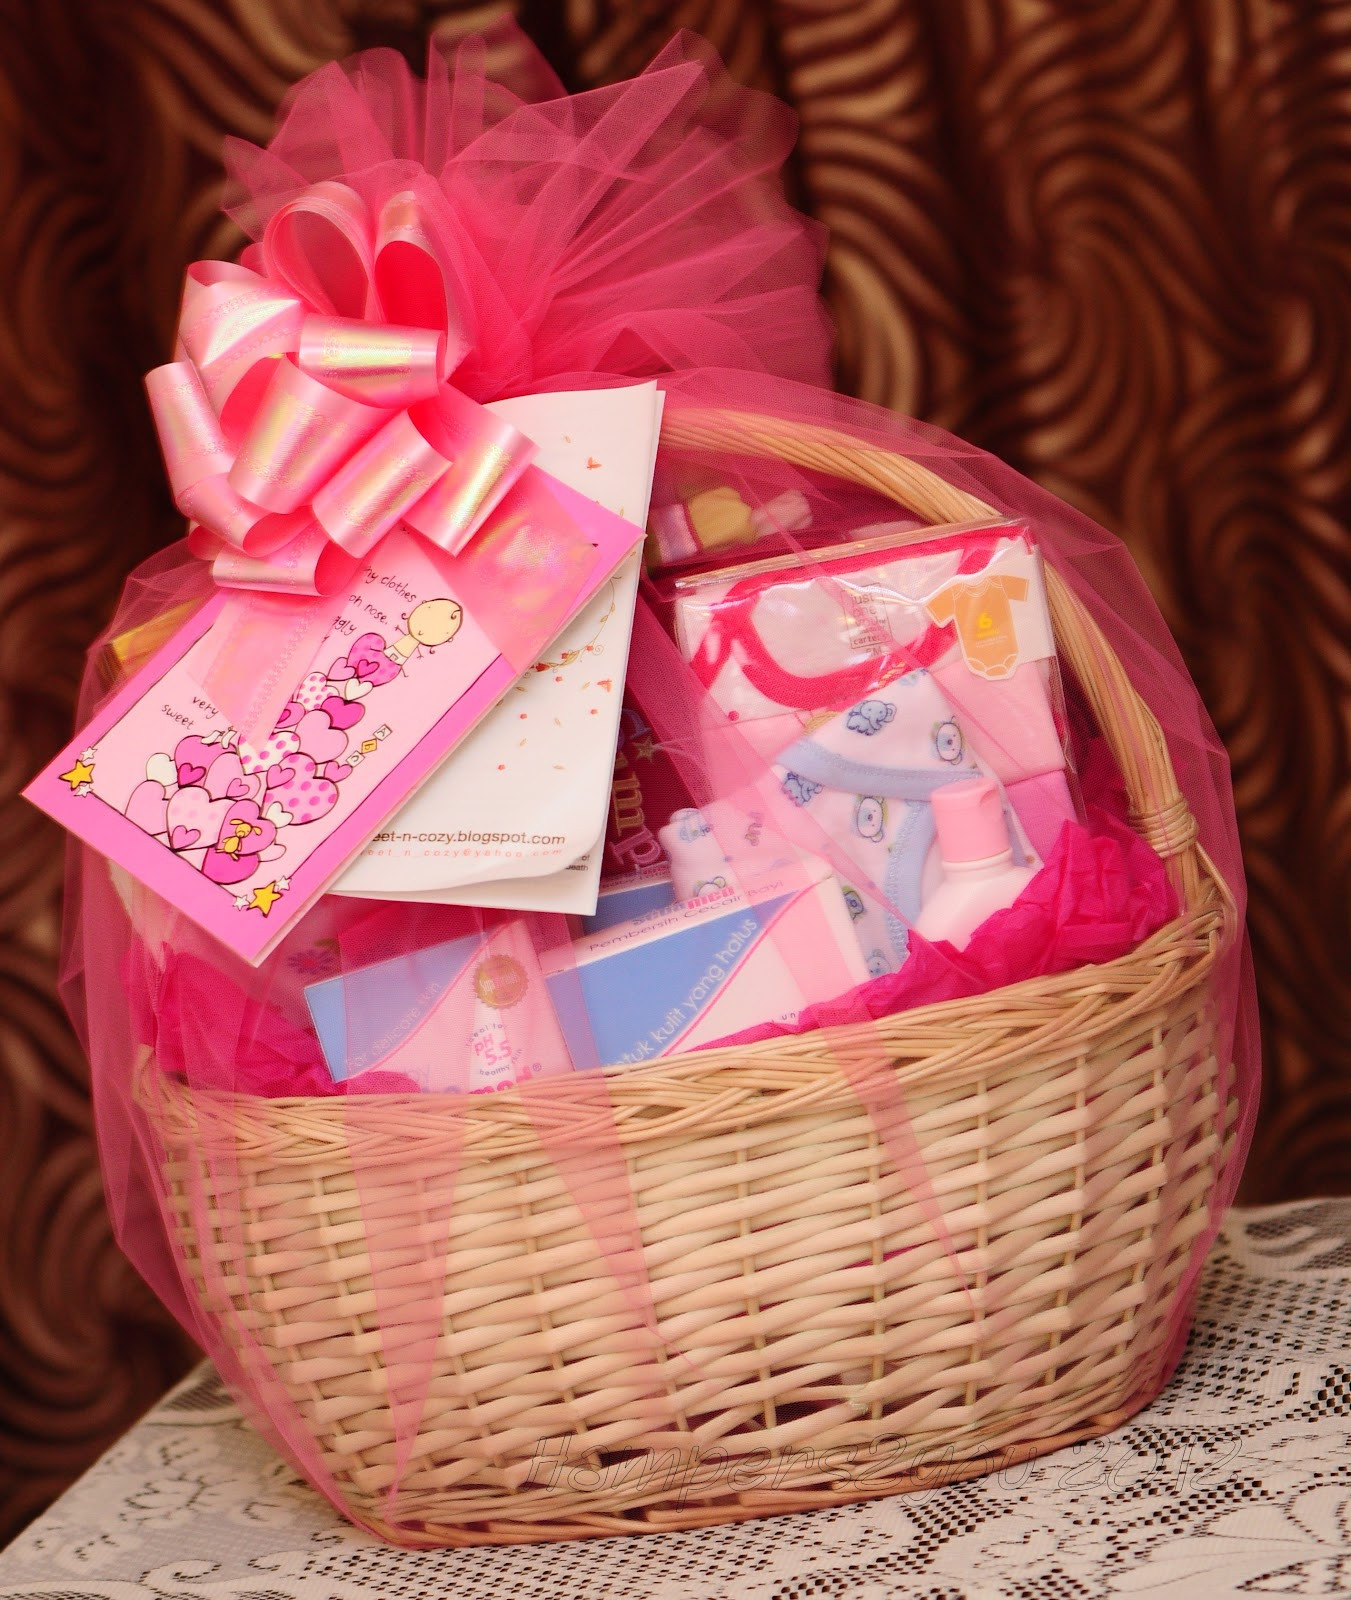 Gifts For Newly Born Baby
 Hampers2you Baby Gift Baskets for Newborn Girl